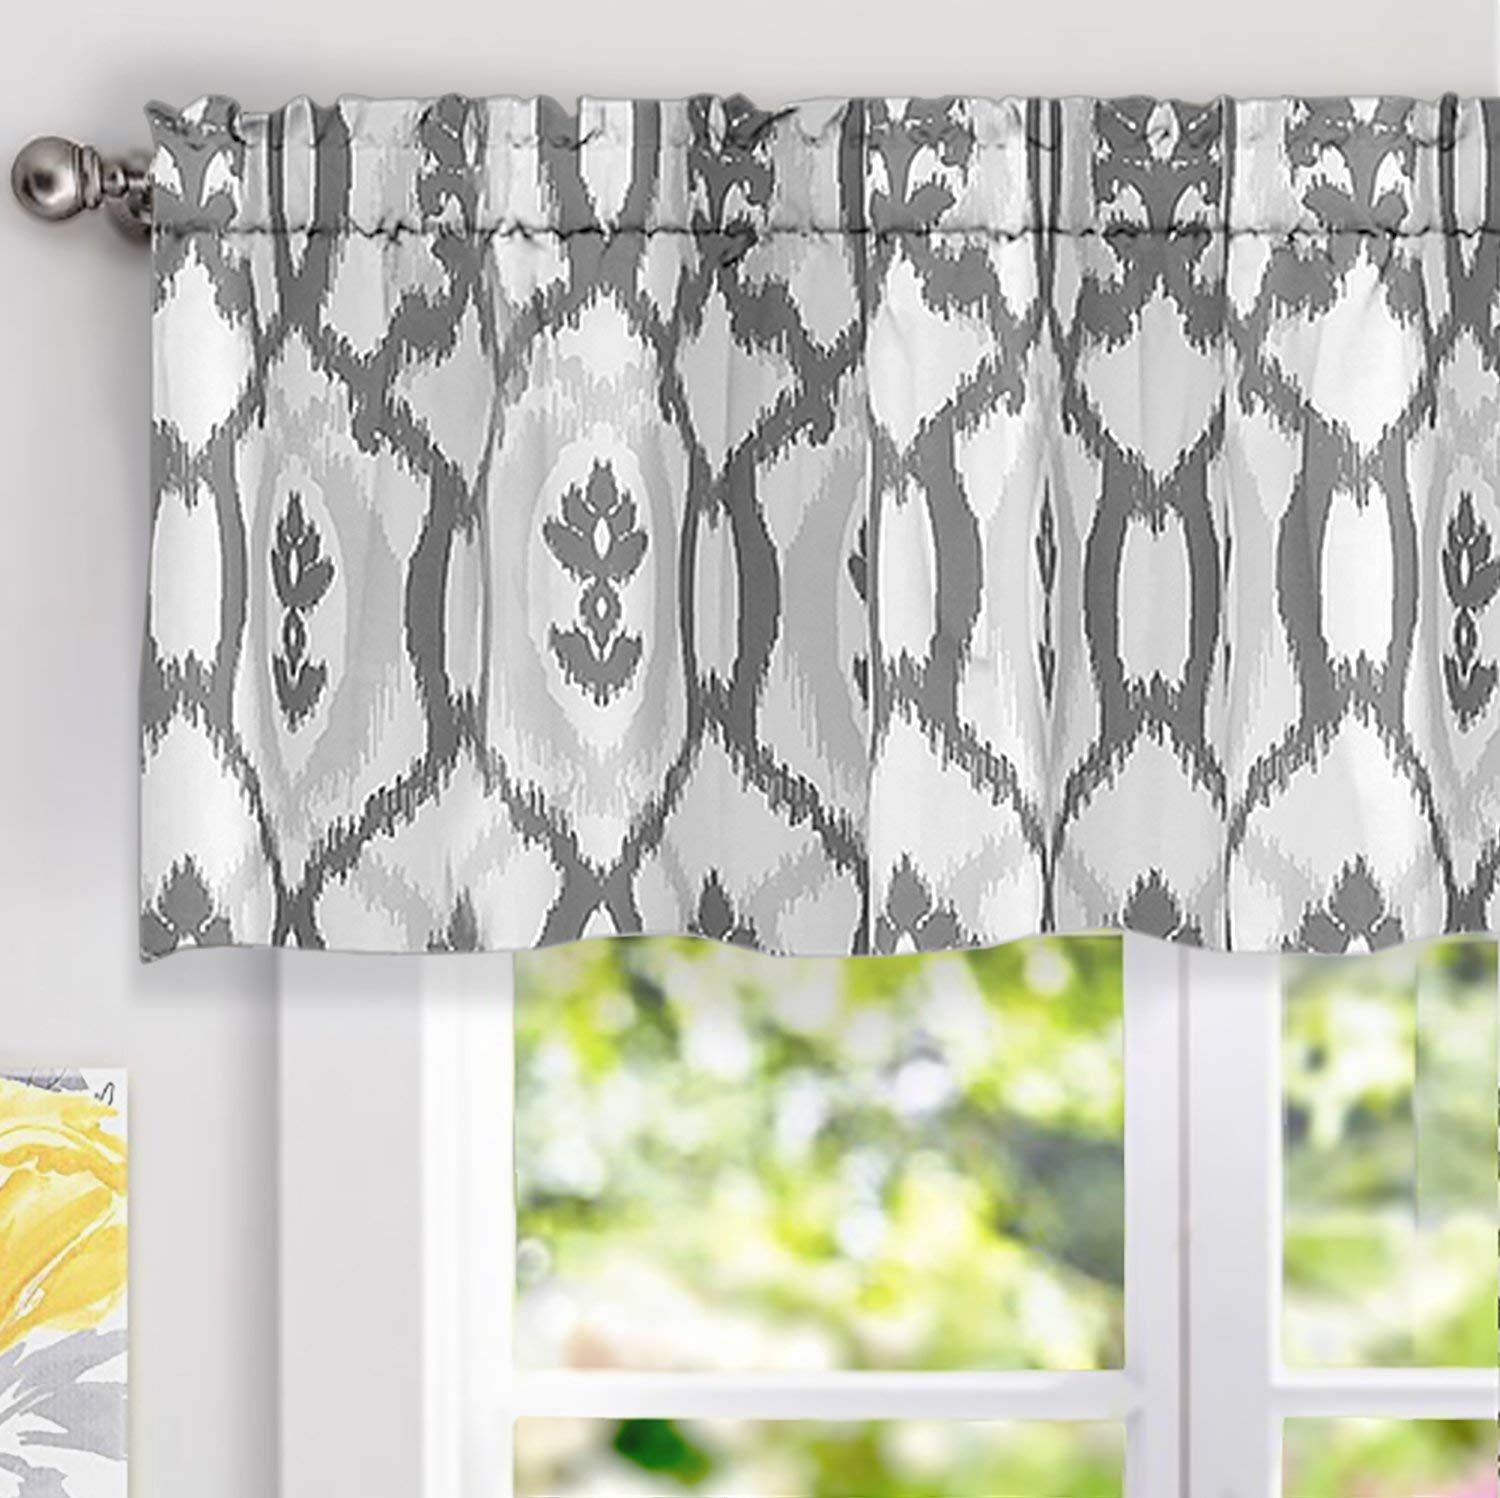 Driftaway Evelyn Ikat Fleur/floral Pattern Window Curtain Valance Intended For Floral Pattern Window Valances (Photo 9 of 20)